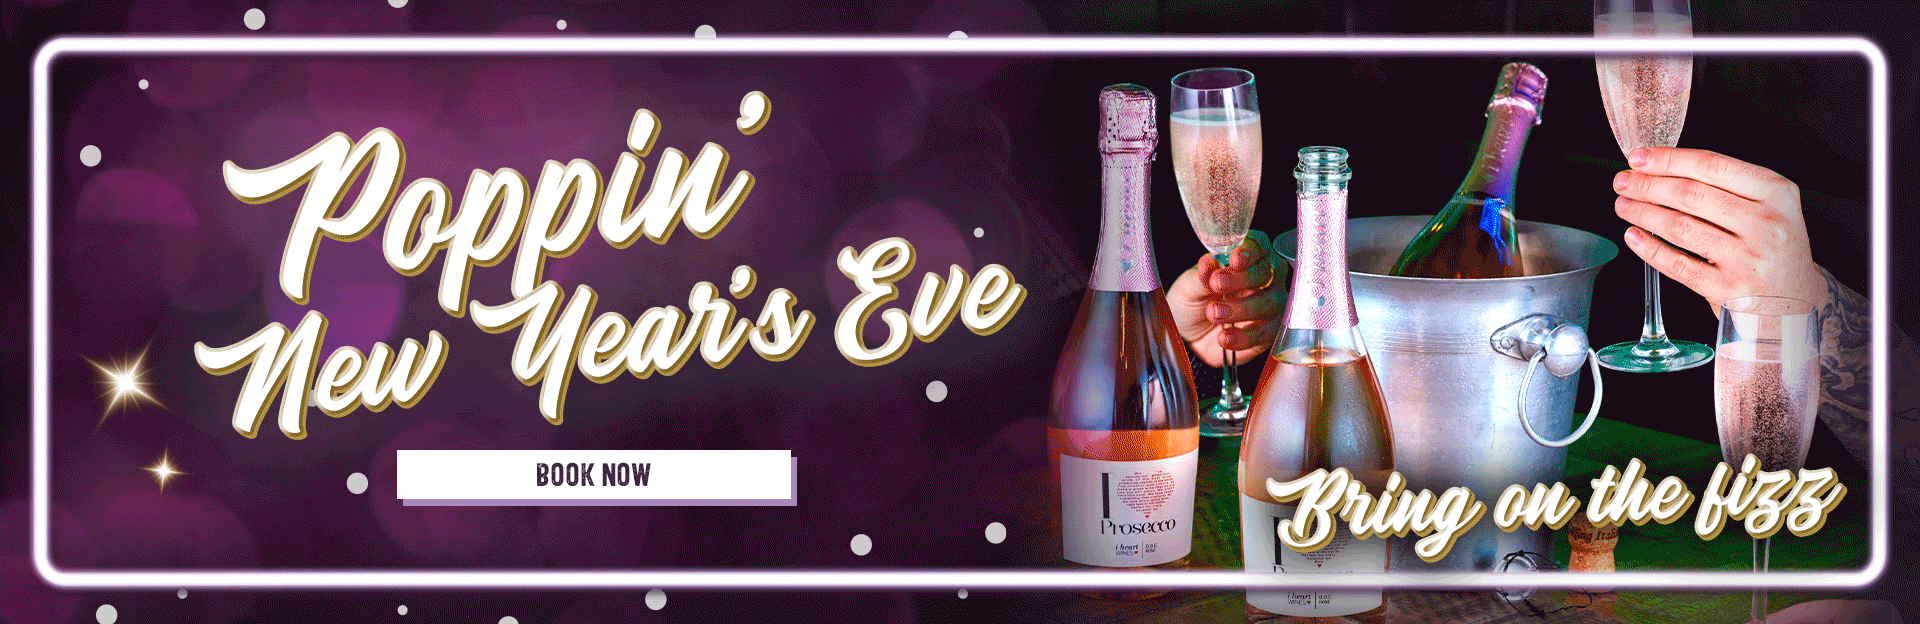 New Year’s Eve at O'Neill's Woking 